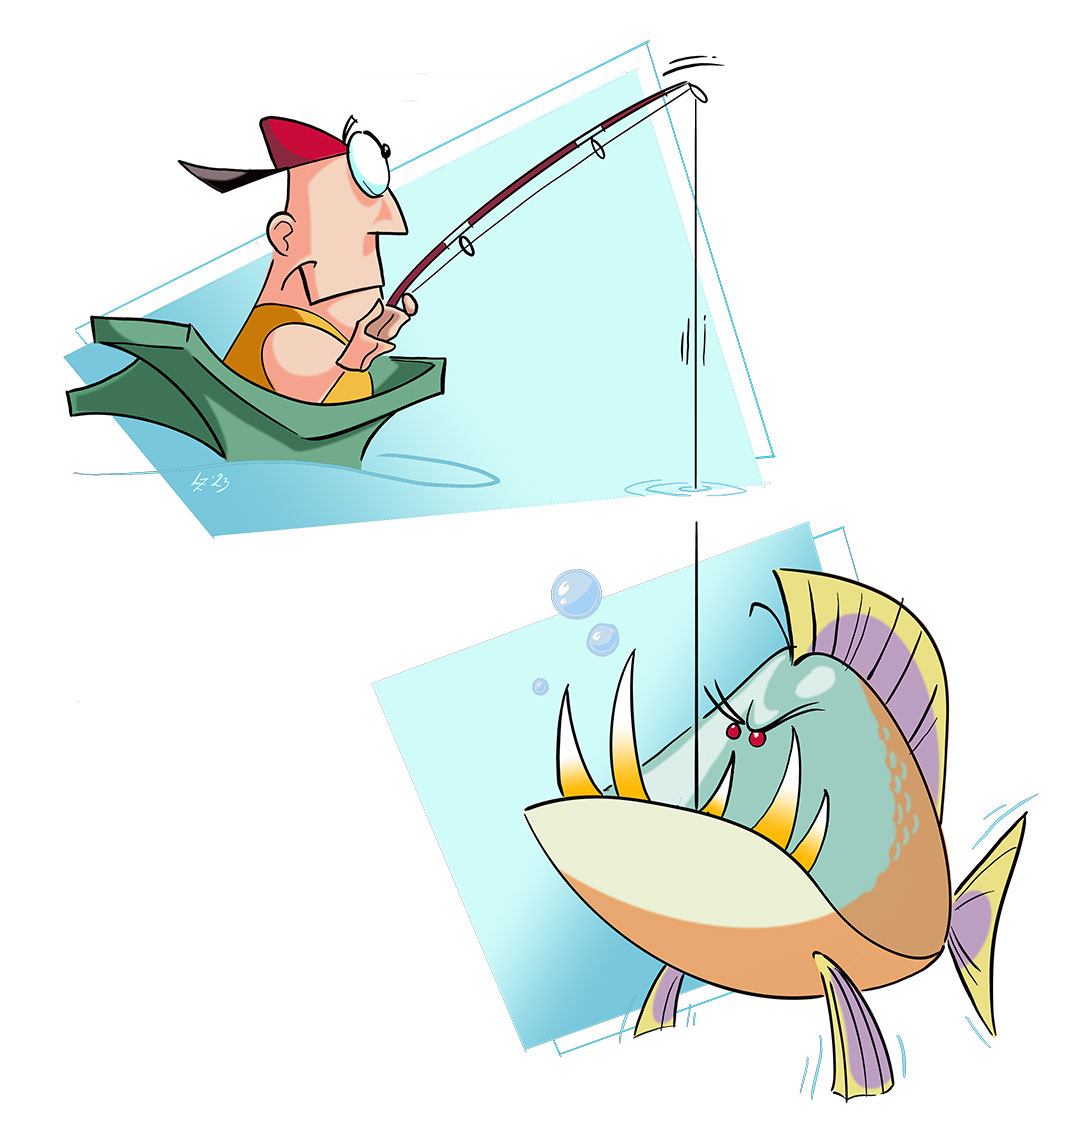 illustration of a person fishing from a kayak and a large, toothy fish taking the bait